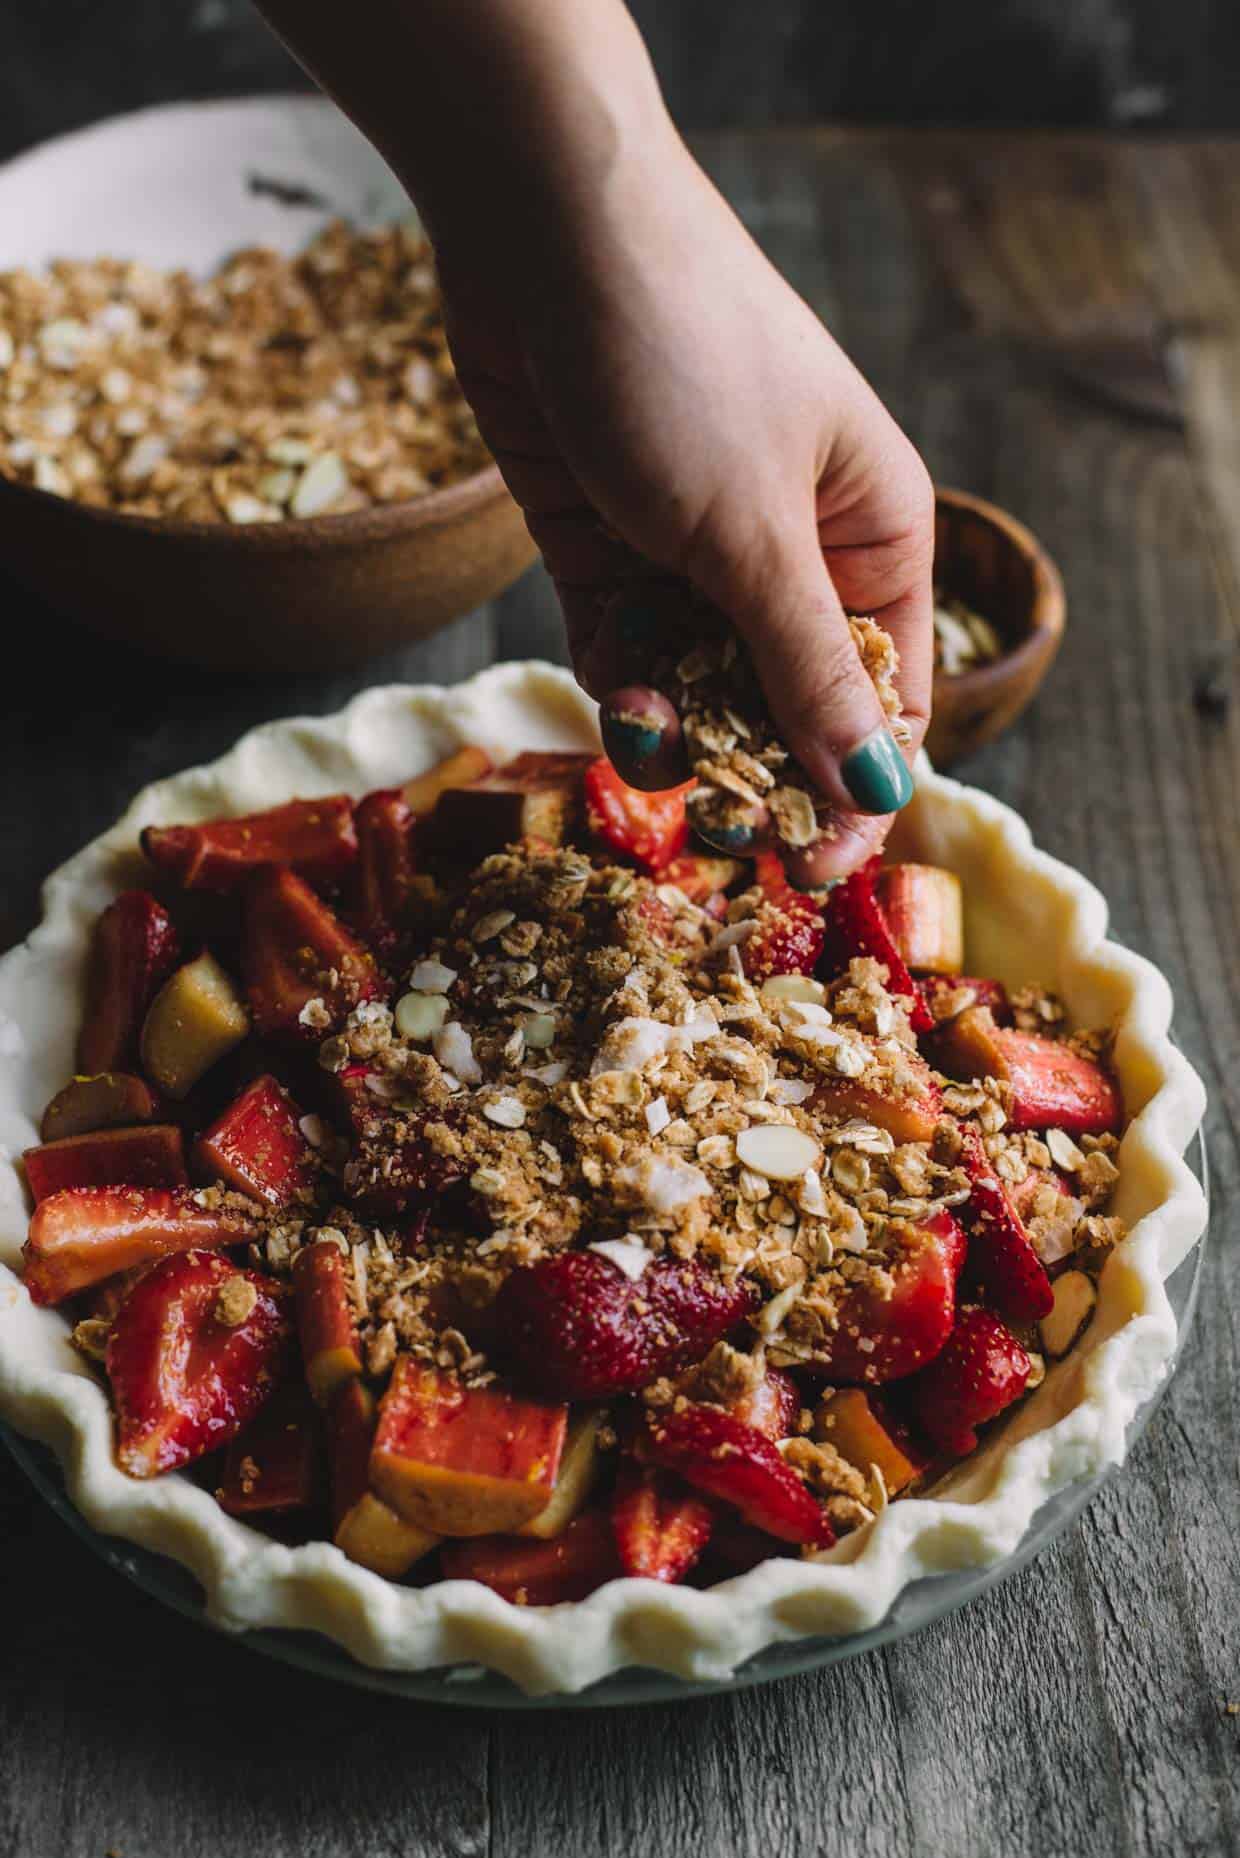 Gluten-Free Strawberry Rhubarb Pie with Crumb Topping - delicious spring pie by @healthynibs